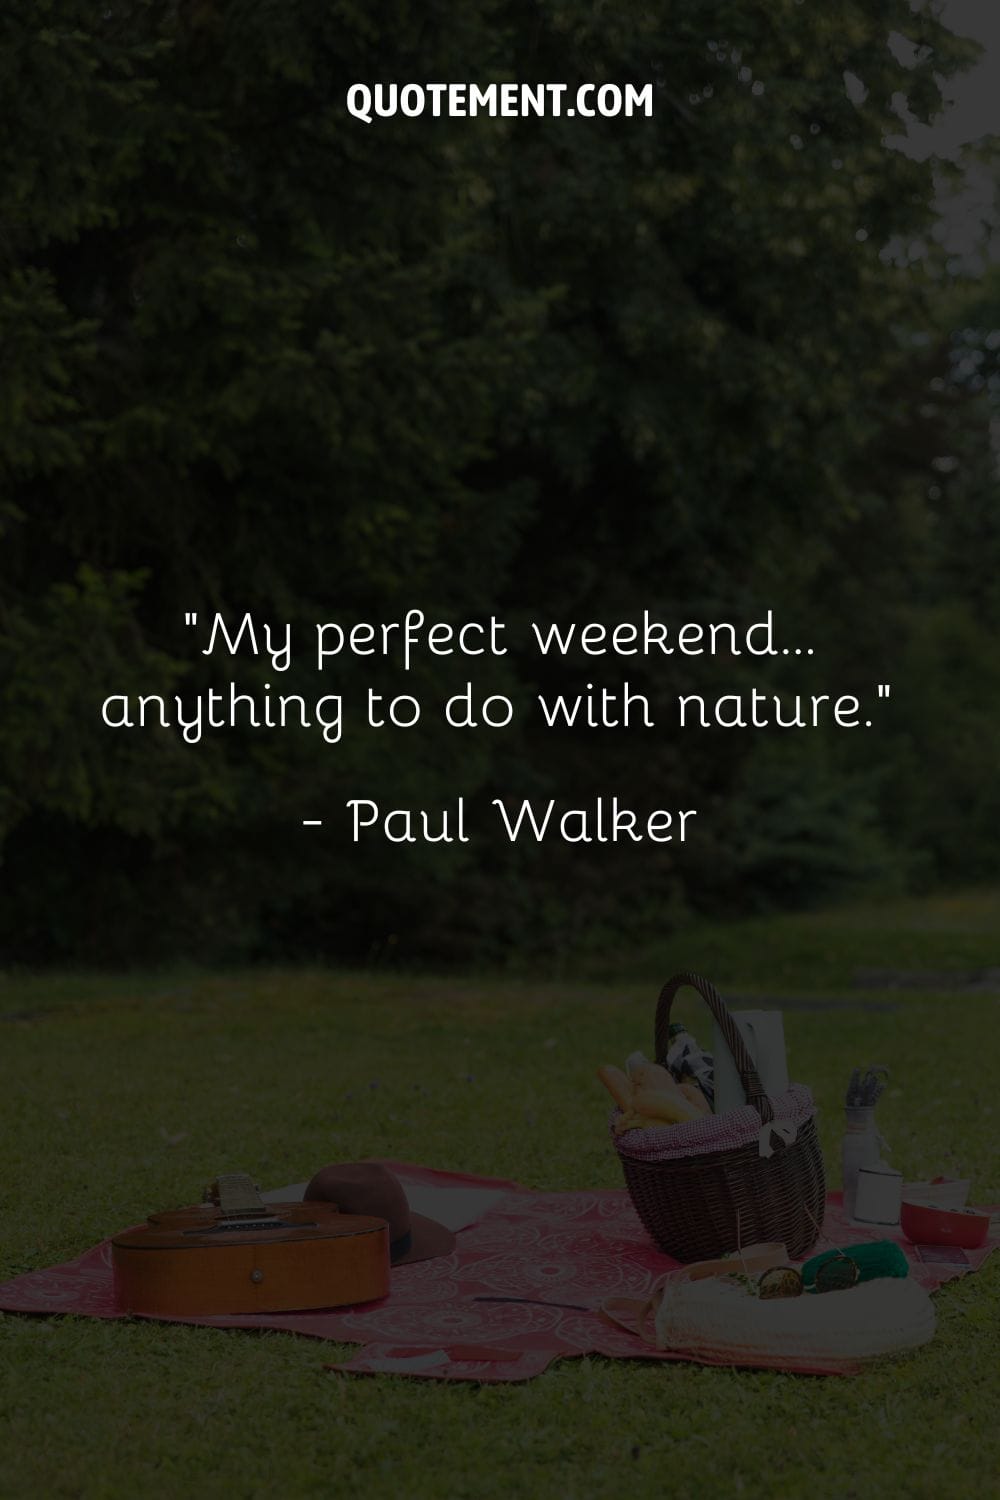 My perfect weekend… anything to do with nature